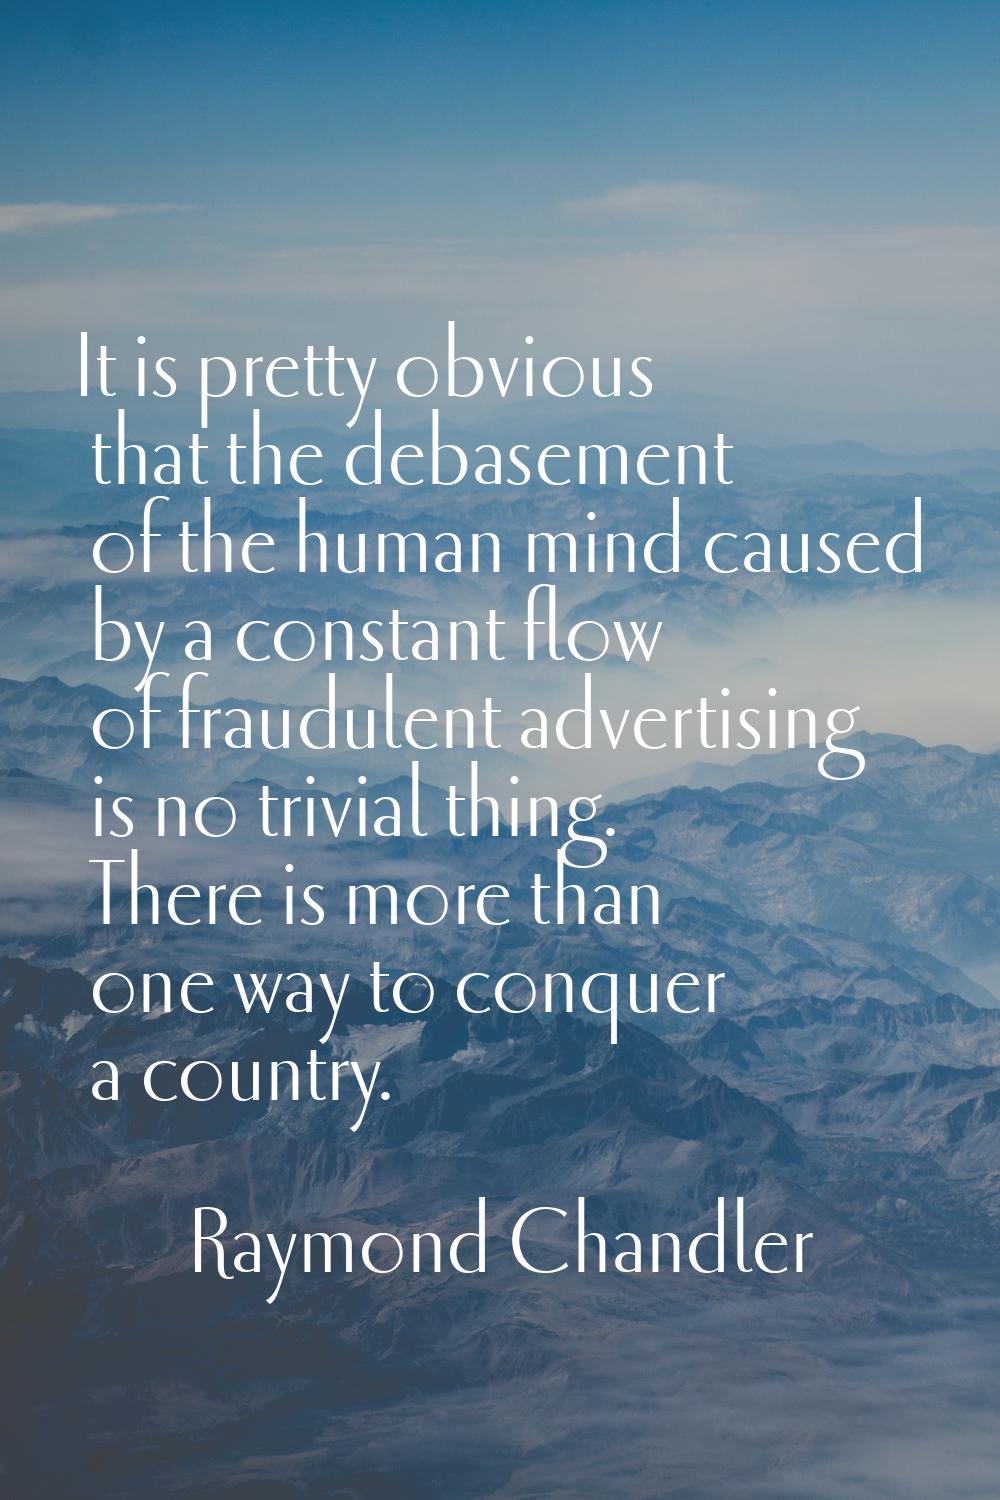 It is pretty obvious that the debasement of the human mind caused by a constant flow of fraudulent 